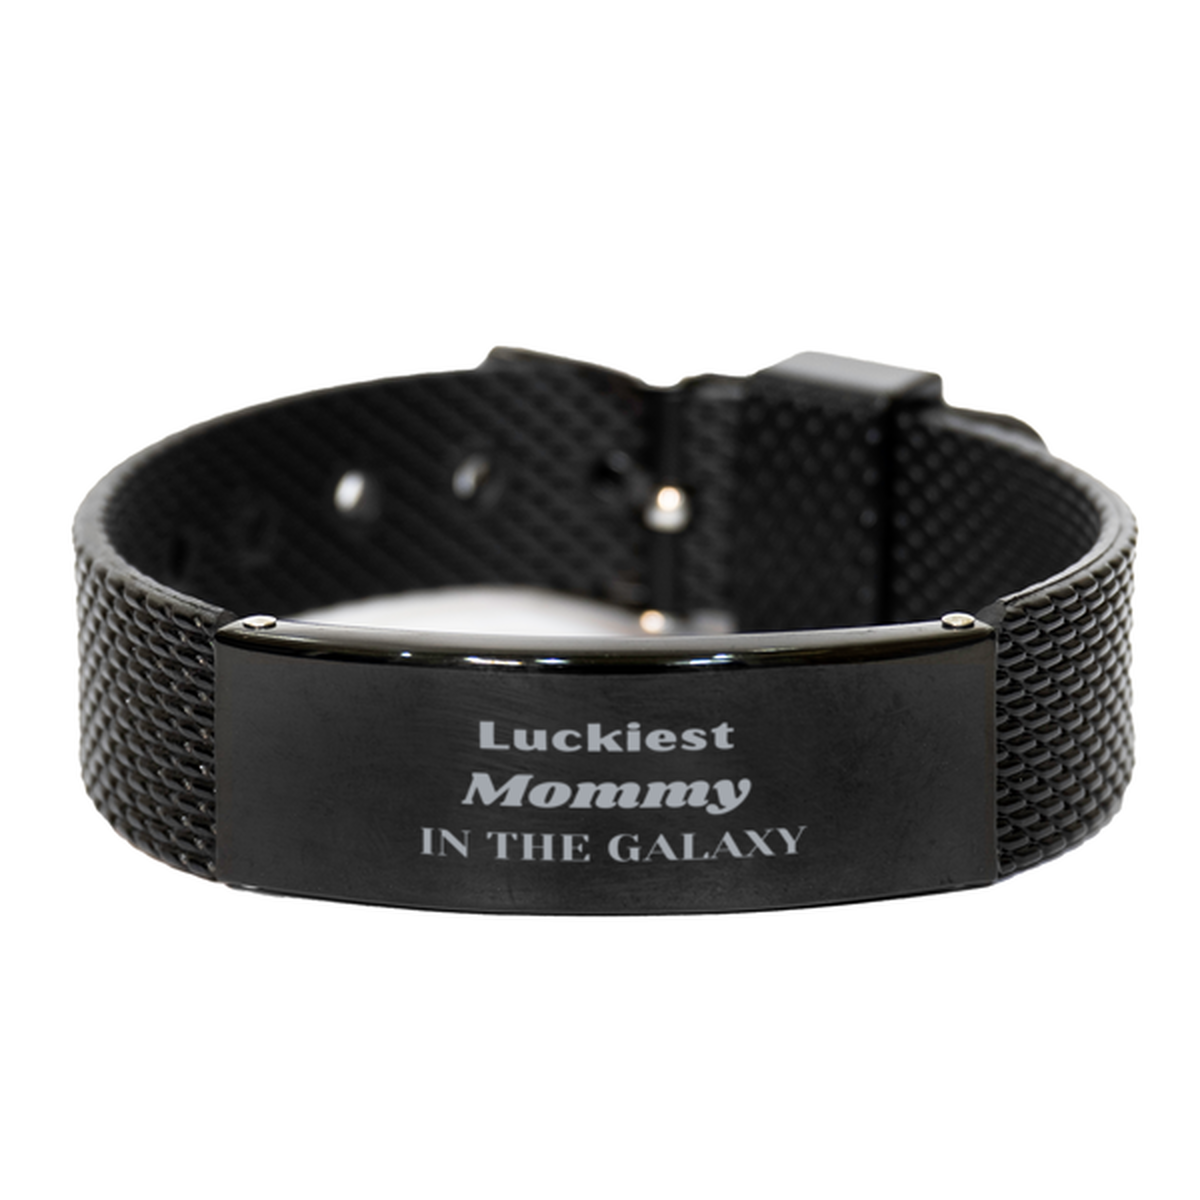 Luckiest Mommy in the Galaxy, To My Mommy Engraved Gifts, Christmas Mommy Black Shark Mesh Bracelet Gifts, X-mas Birthday Unique Gifts For Mommy Men Women